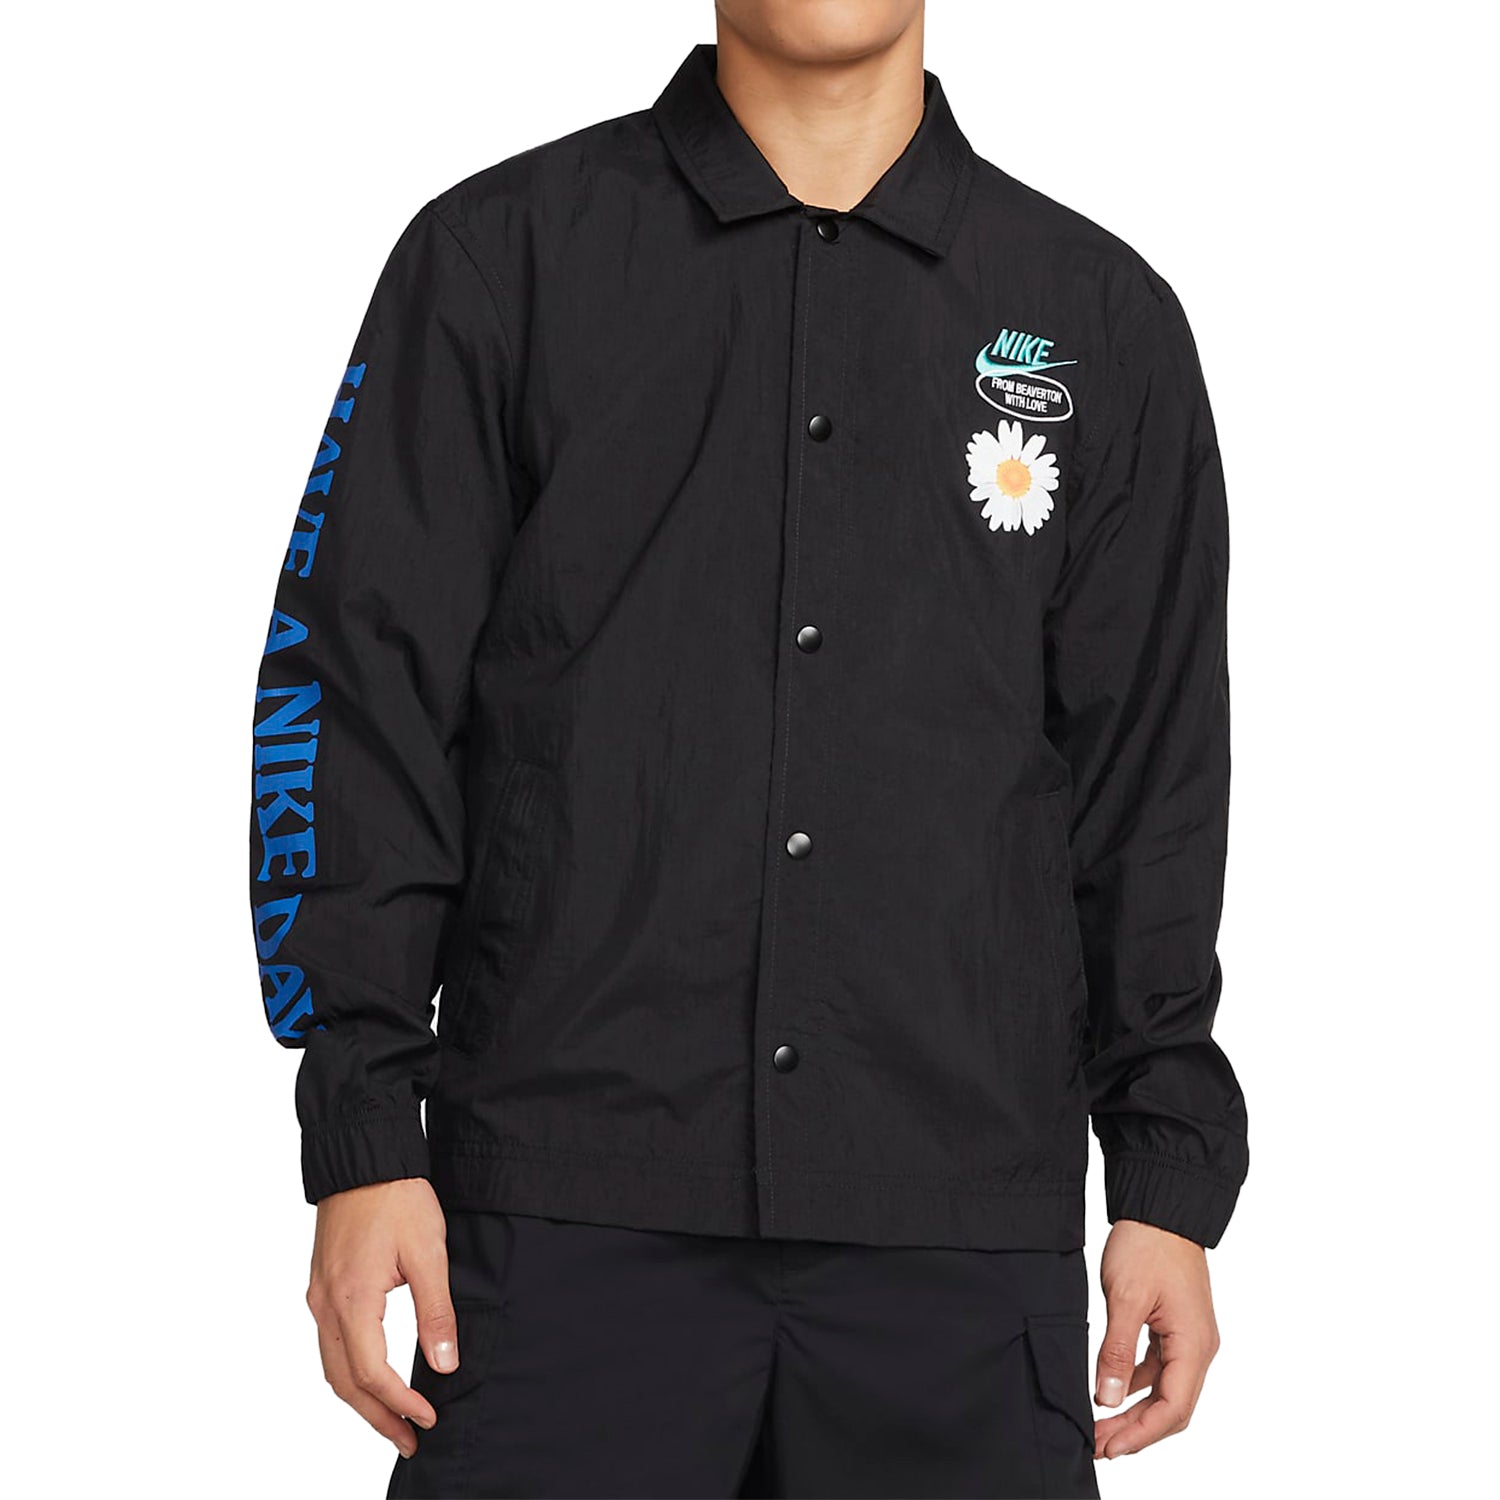 Nike Sportswear Have A Nike Day Snap-front Coaches Jacket Mens